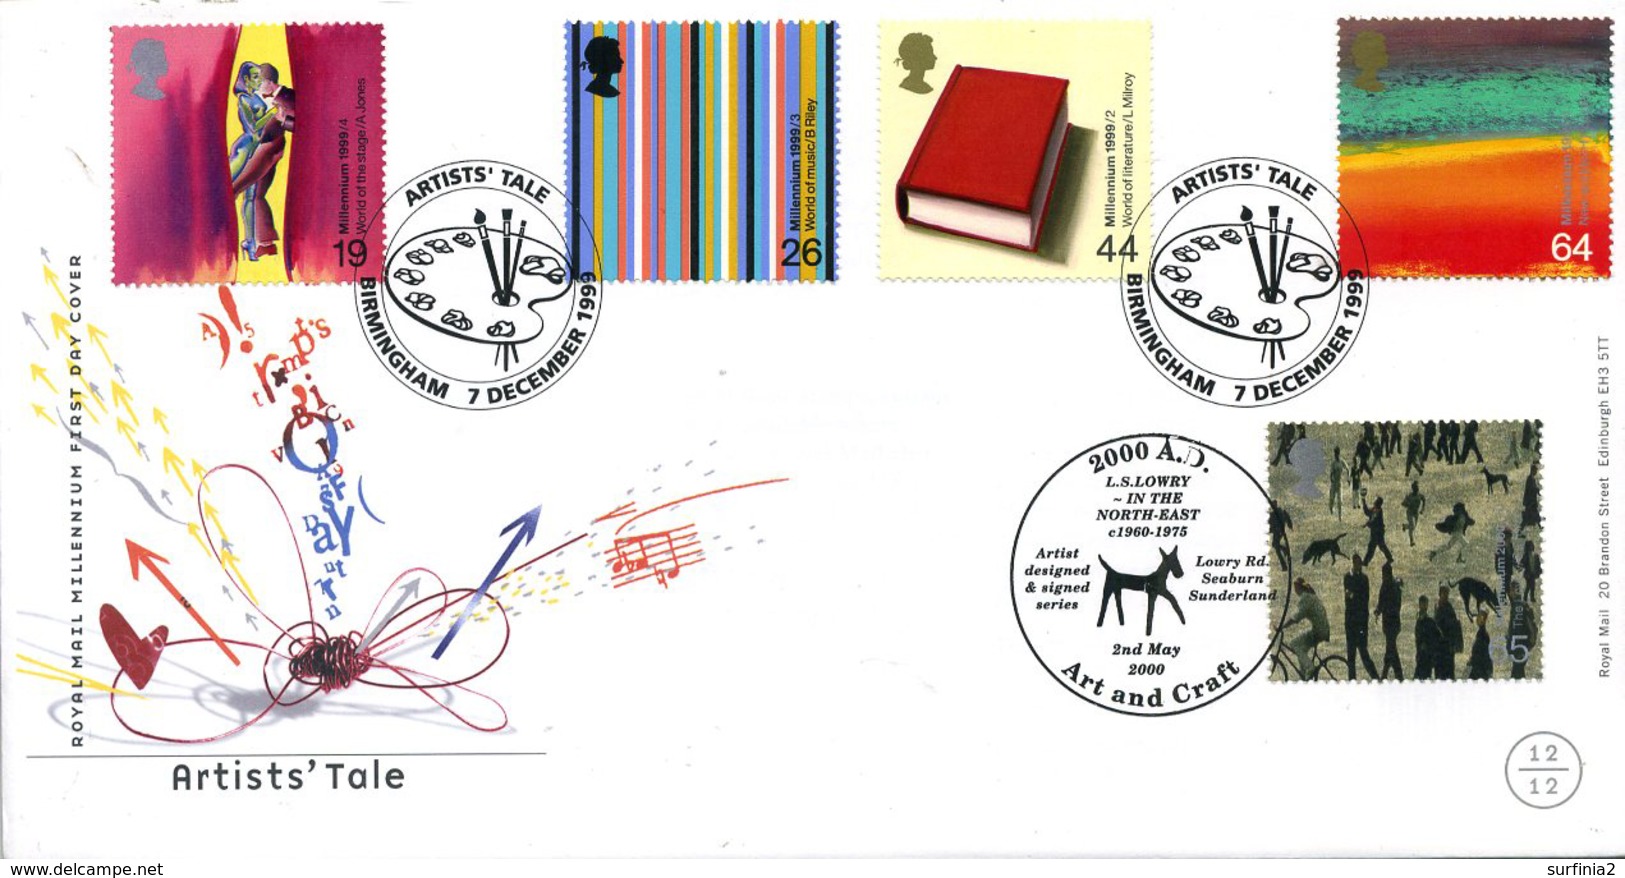 FIRST DAY COVER - 1999 - ARTISTS TALEwith ADDED ART AND CRAFT - Cov19 - 1991-2000 Em. Décimales